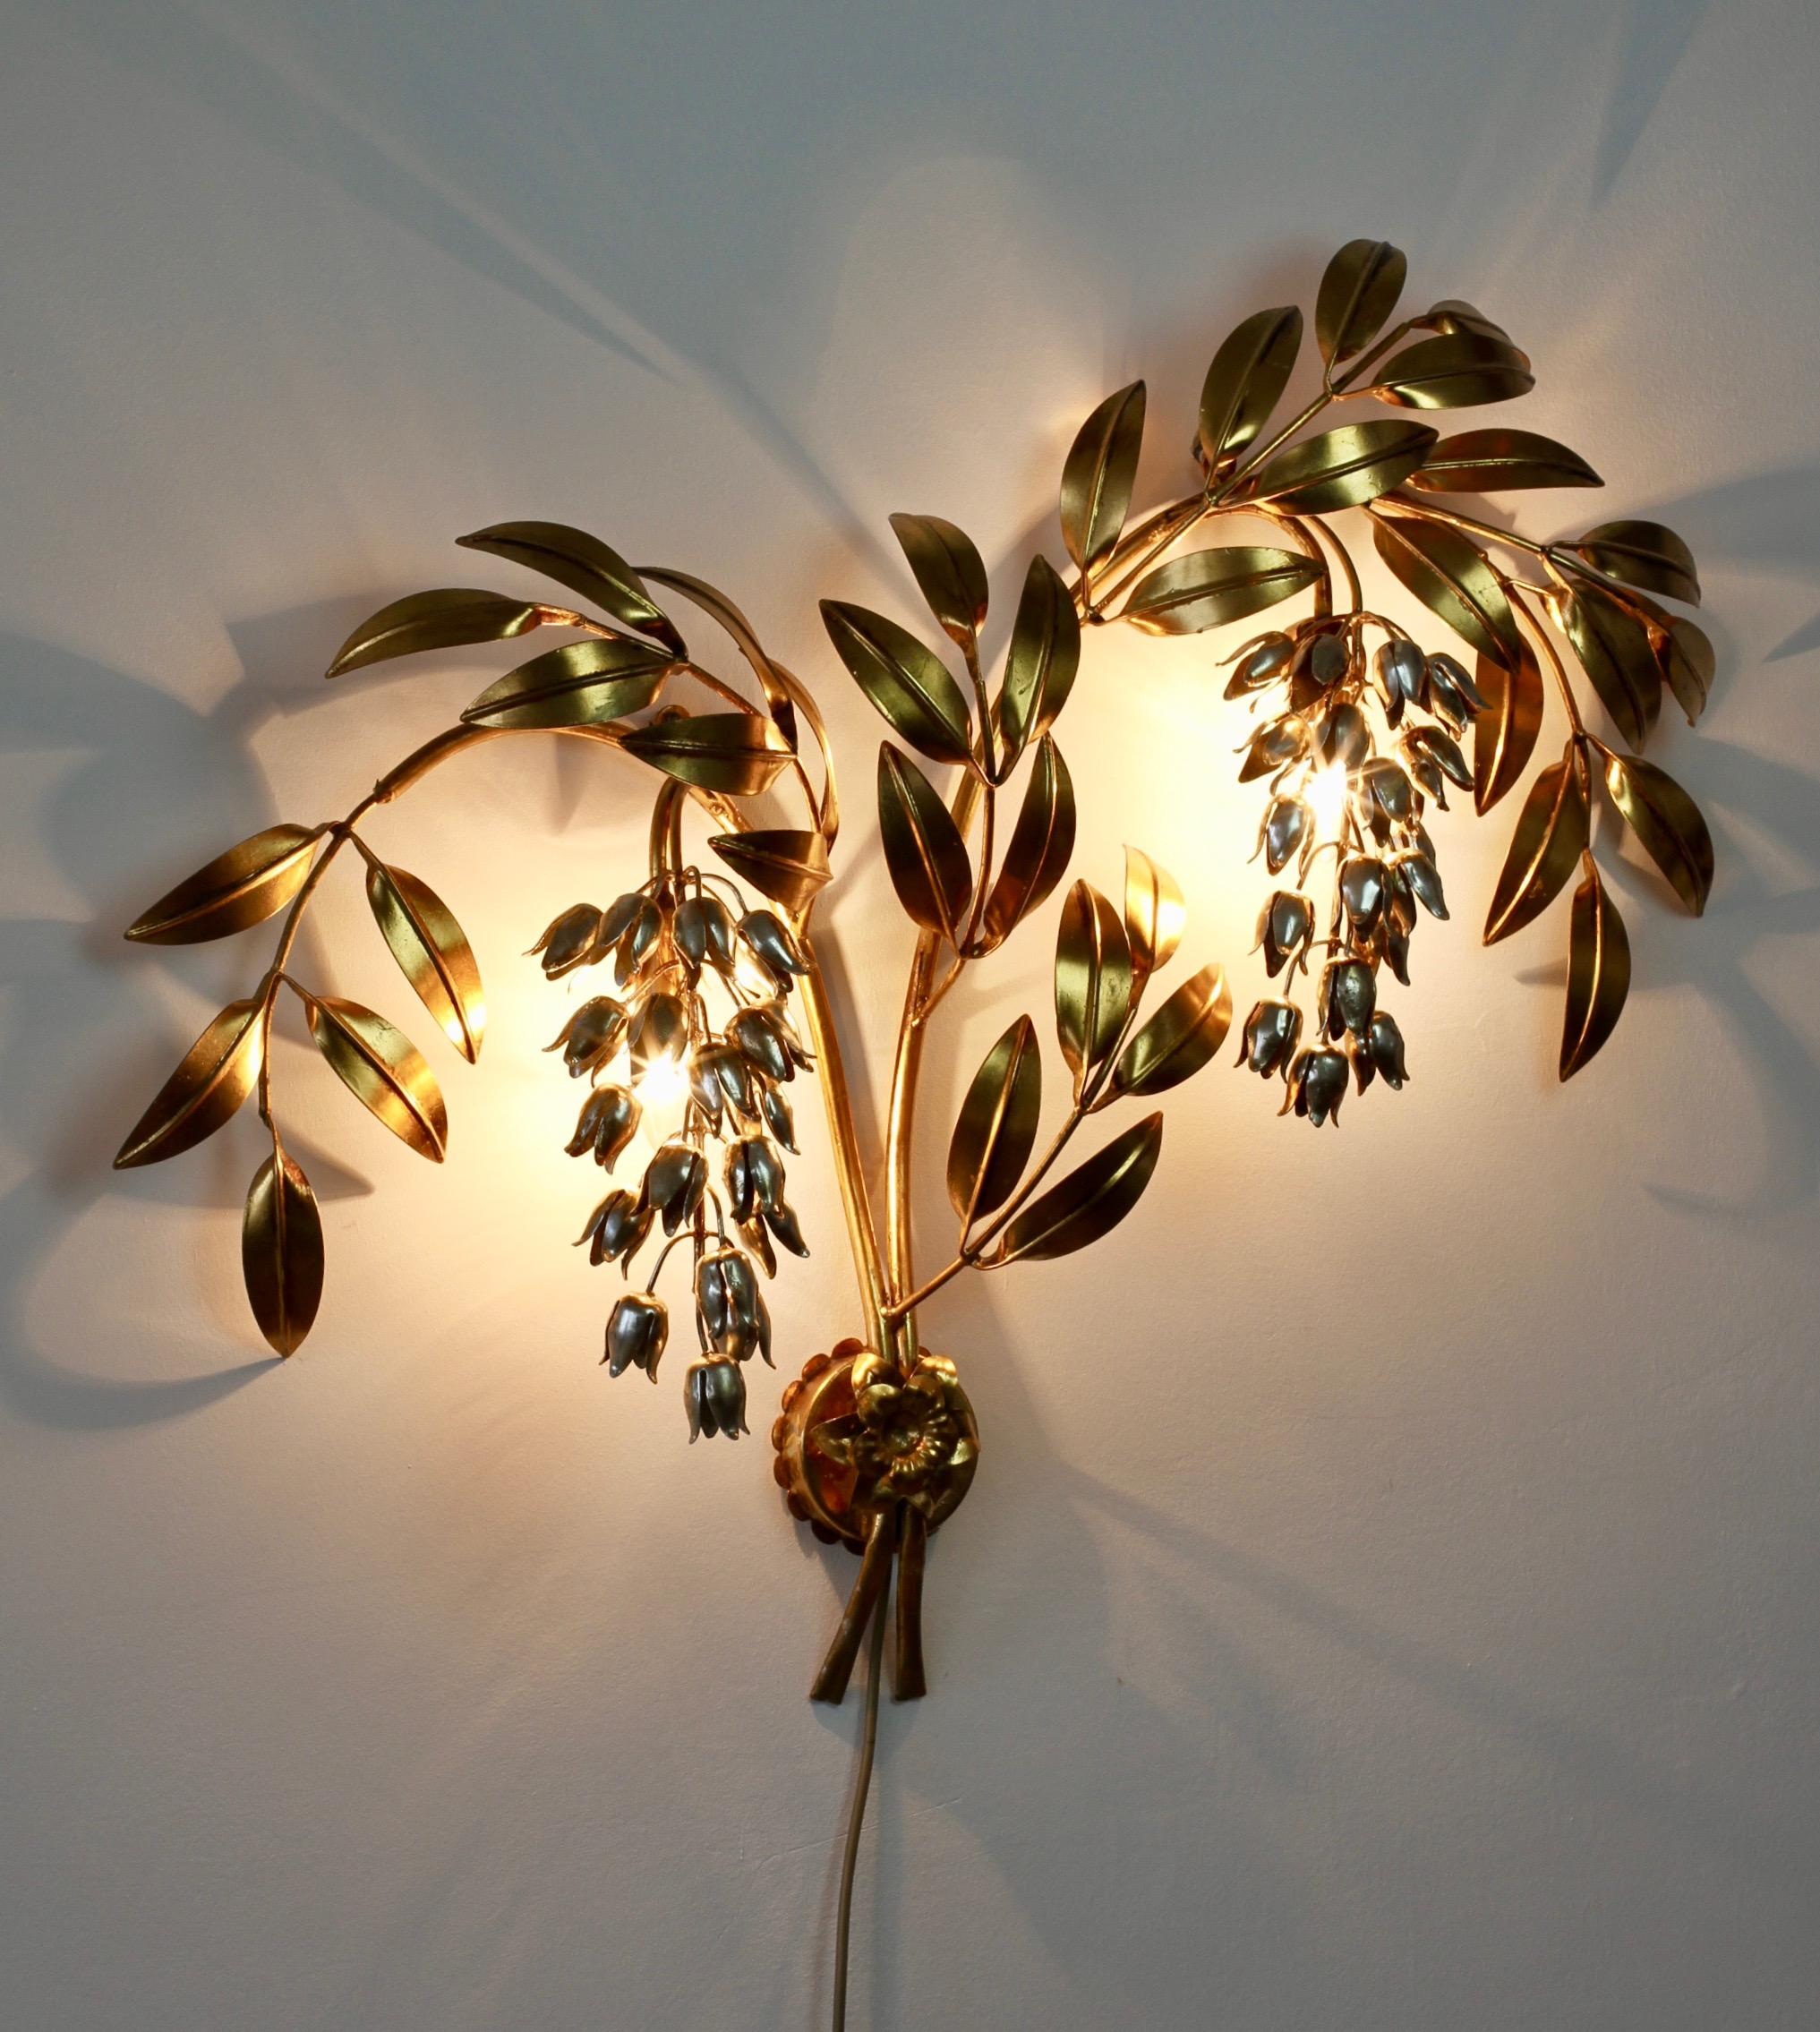 20th Century Hans Kögl Italian Pioggia d'Oro Ornate Gilt Vintage Wall Light, Lamp or Sconce For Sale